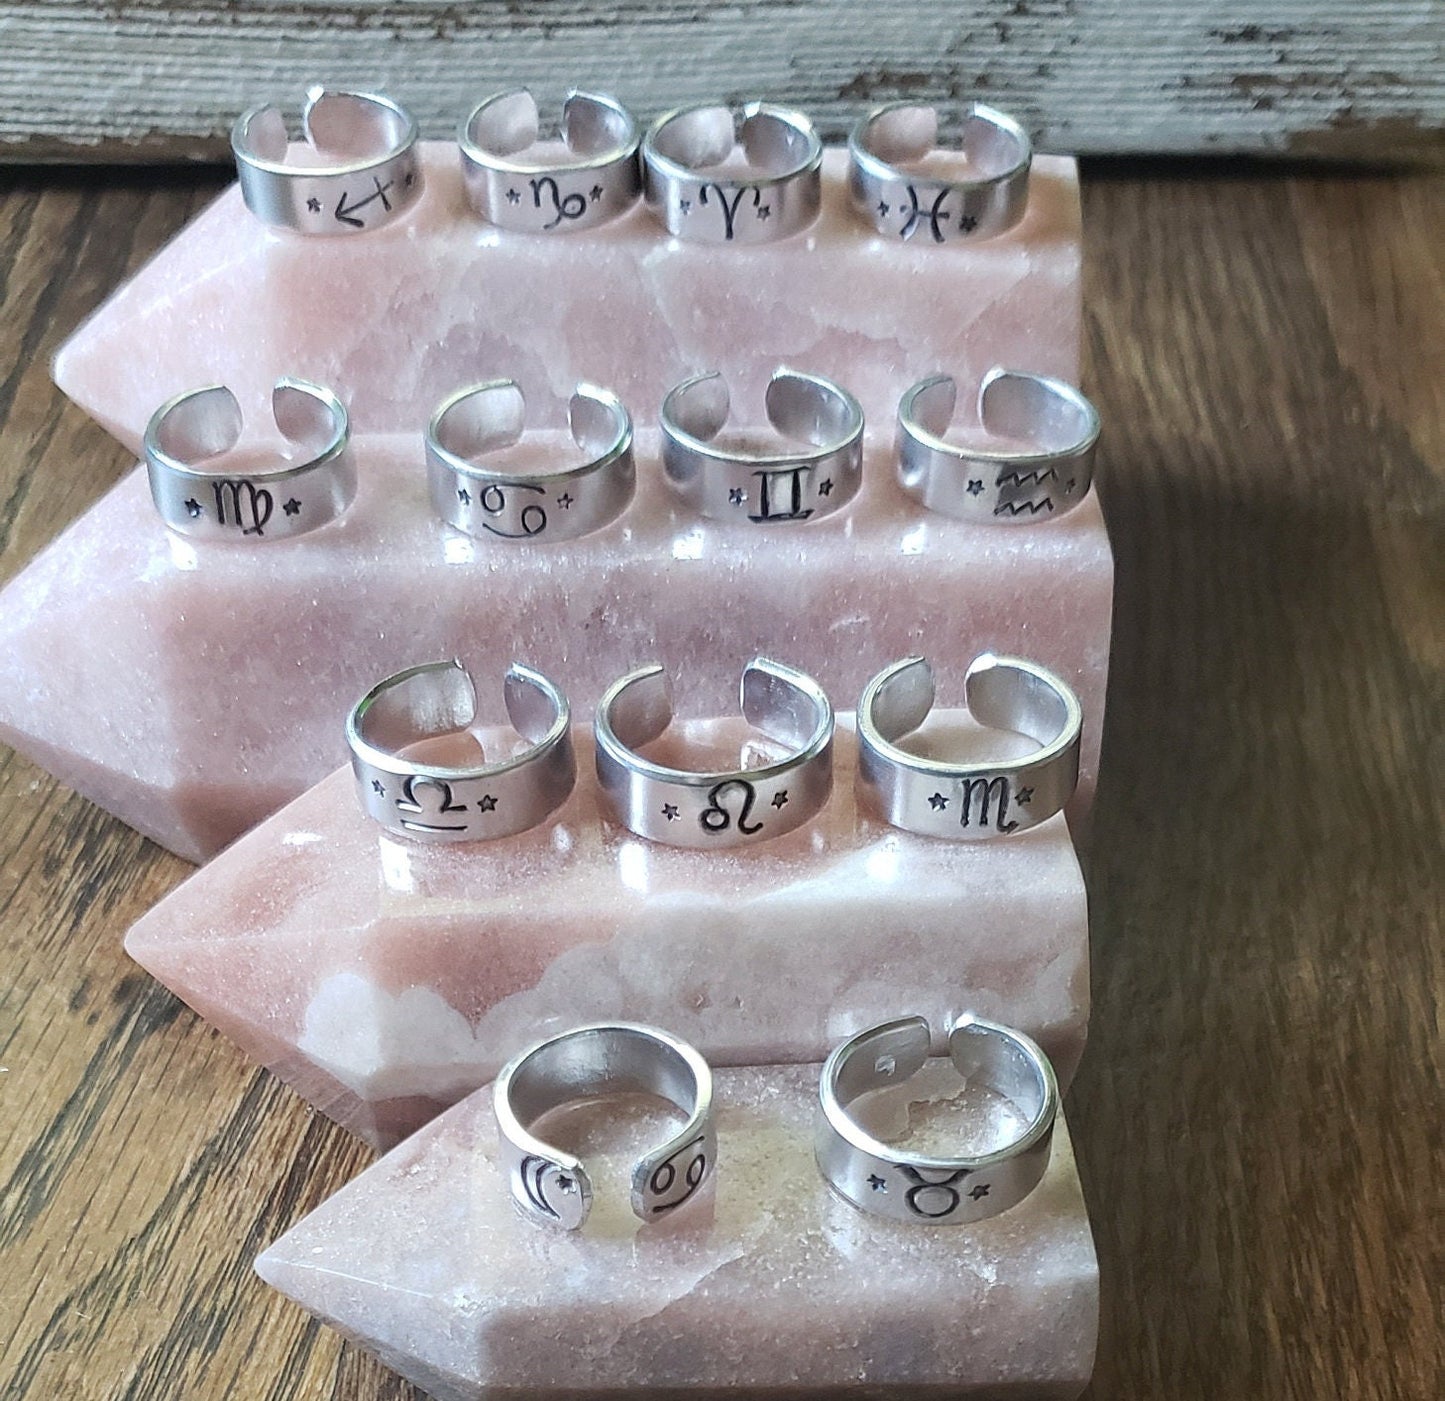 ZODIAC Rings | Handstamped Tarnish Resistant Silver Zodiac Rings | Moon and Star Signs |  Silver Horoscope Rings | Scorpio Leo Libra